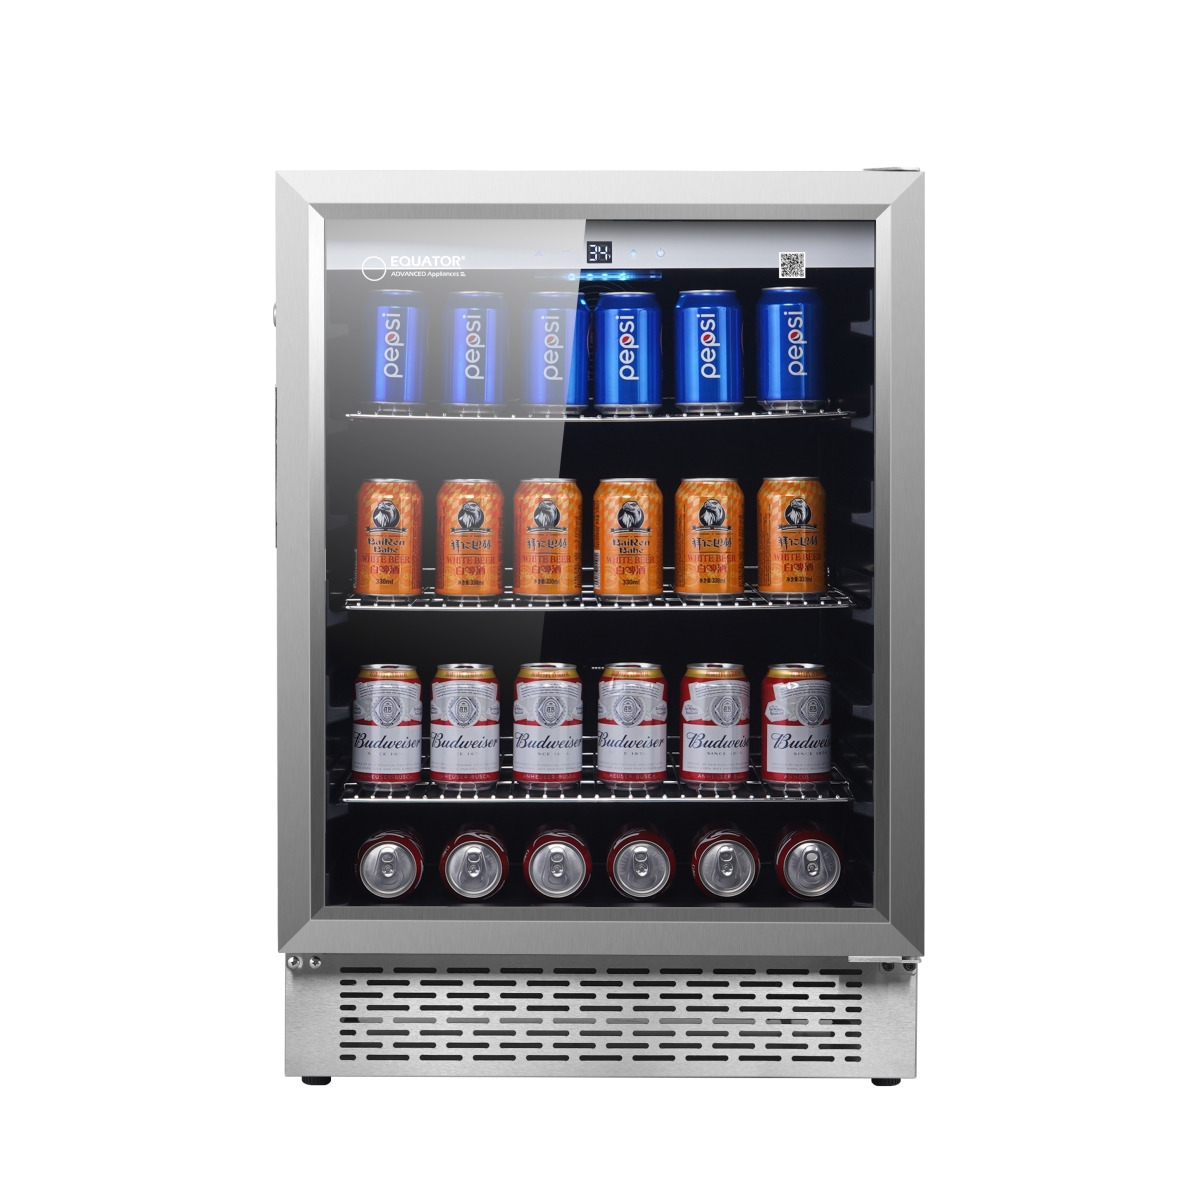 Picture of Equator Advanced Appliances OR 460 Equator 4.6cf Built-in/Freestanding Outdoor/Indoor Refrigerator with 7 Color LED Lights 